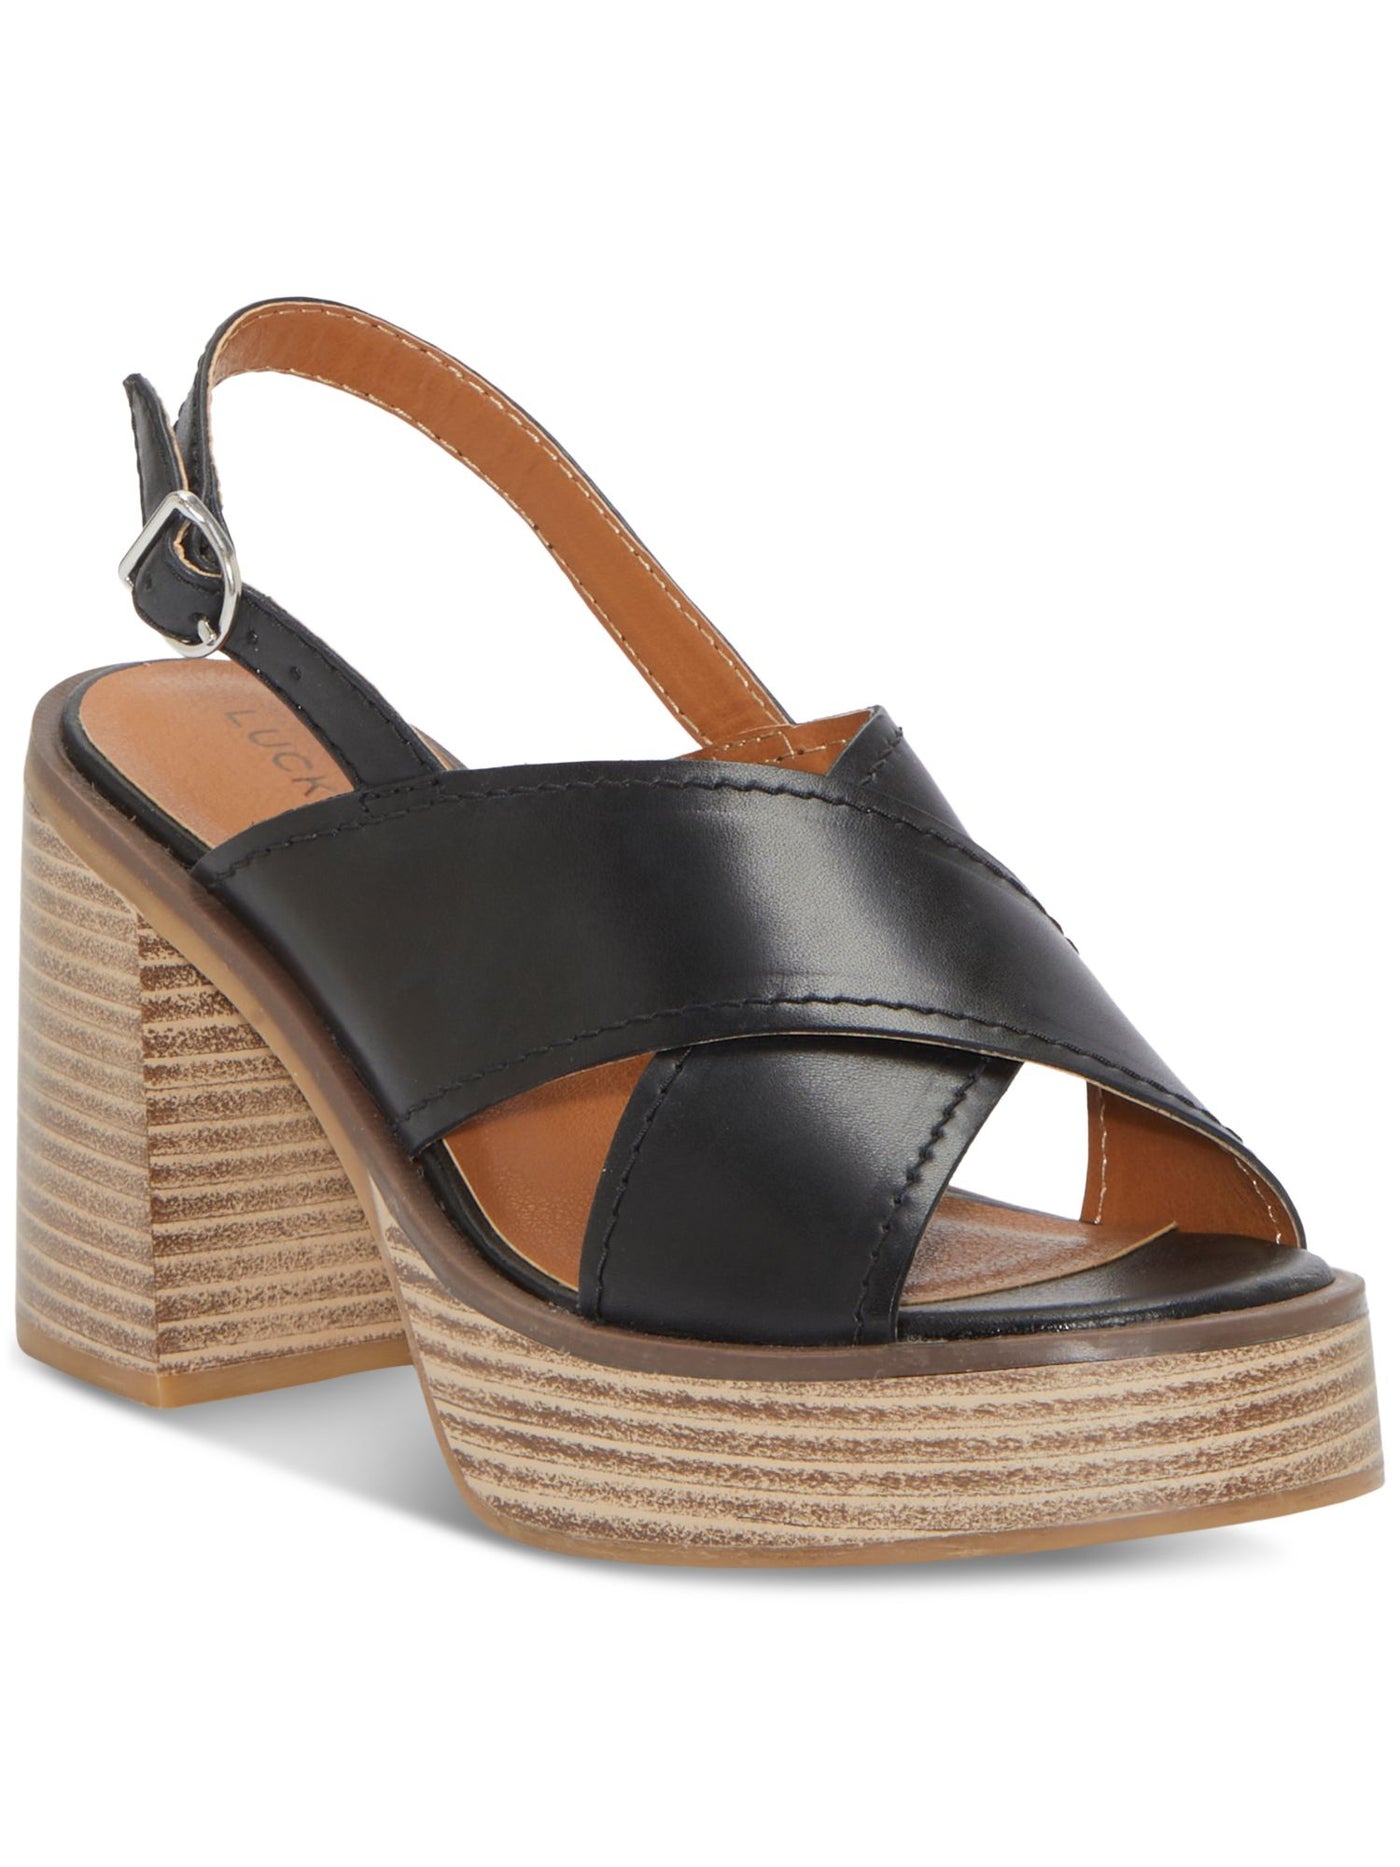 LUCKY BRAND Womens Black Padded Delmie Round Toe Stacked Heel Buckle Leather Slingback Sandal 8 M